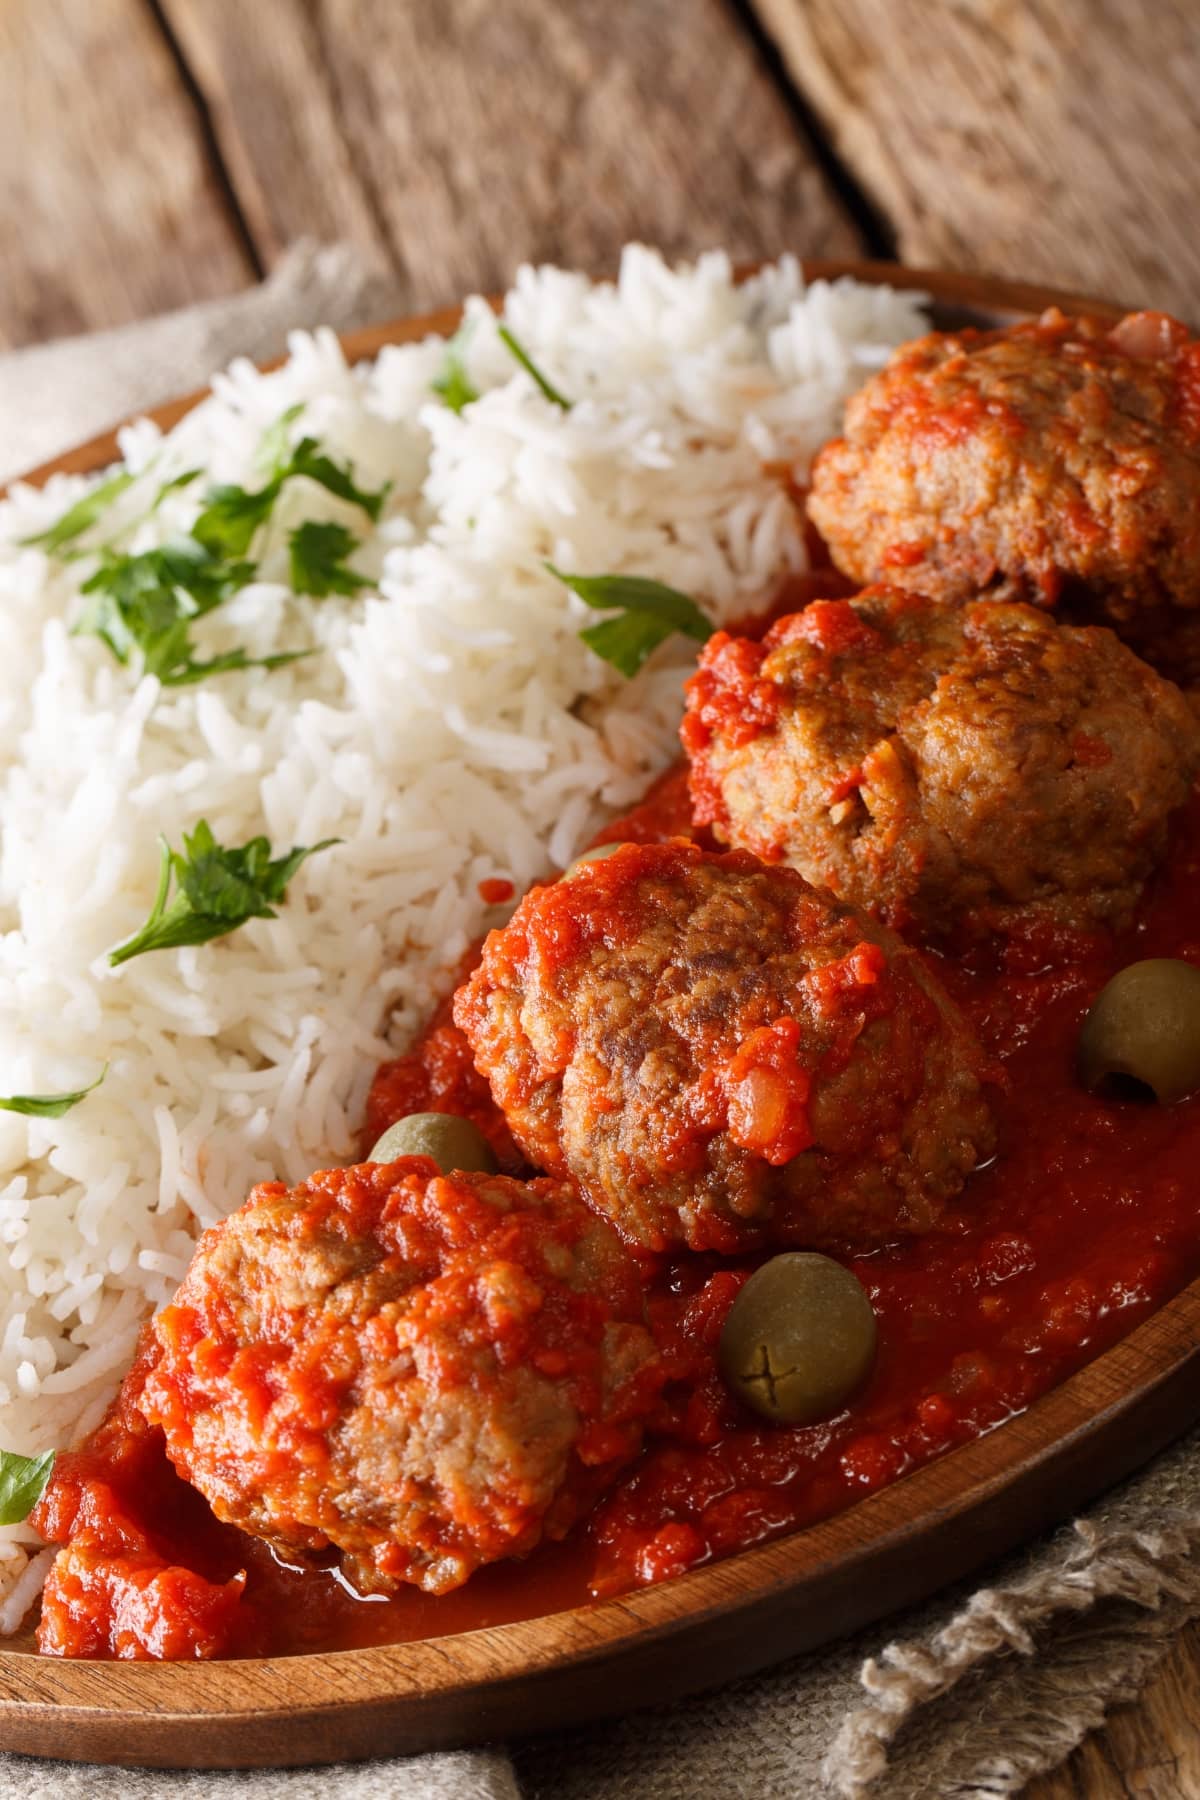 Homemade Greek Meatballs with Ground Beef, Tomatoes and Rice